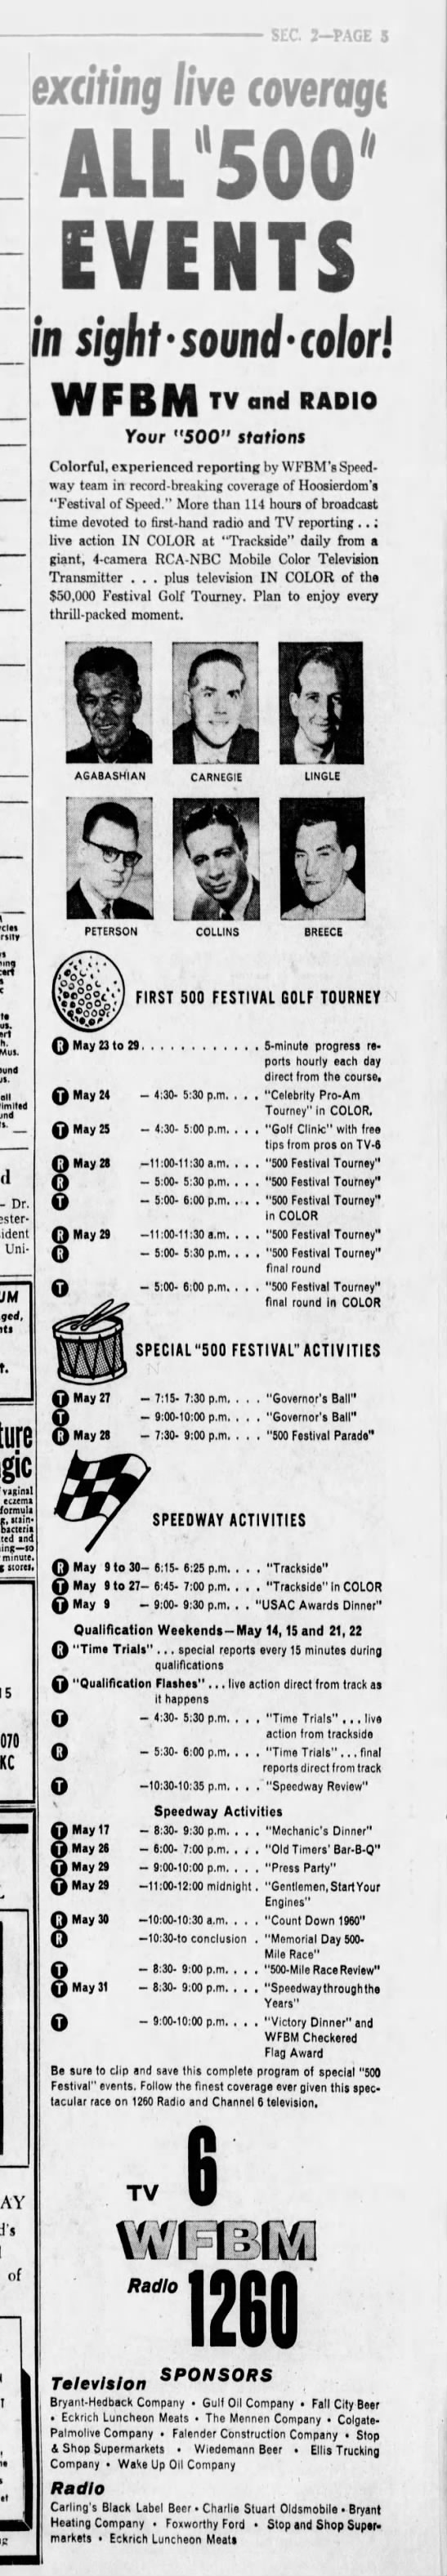 1960 Indy TV coverage - 